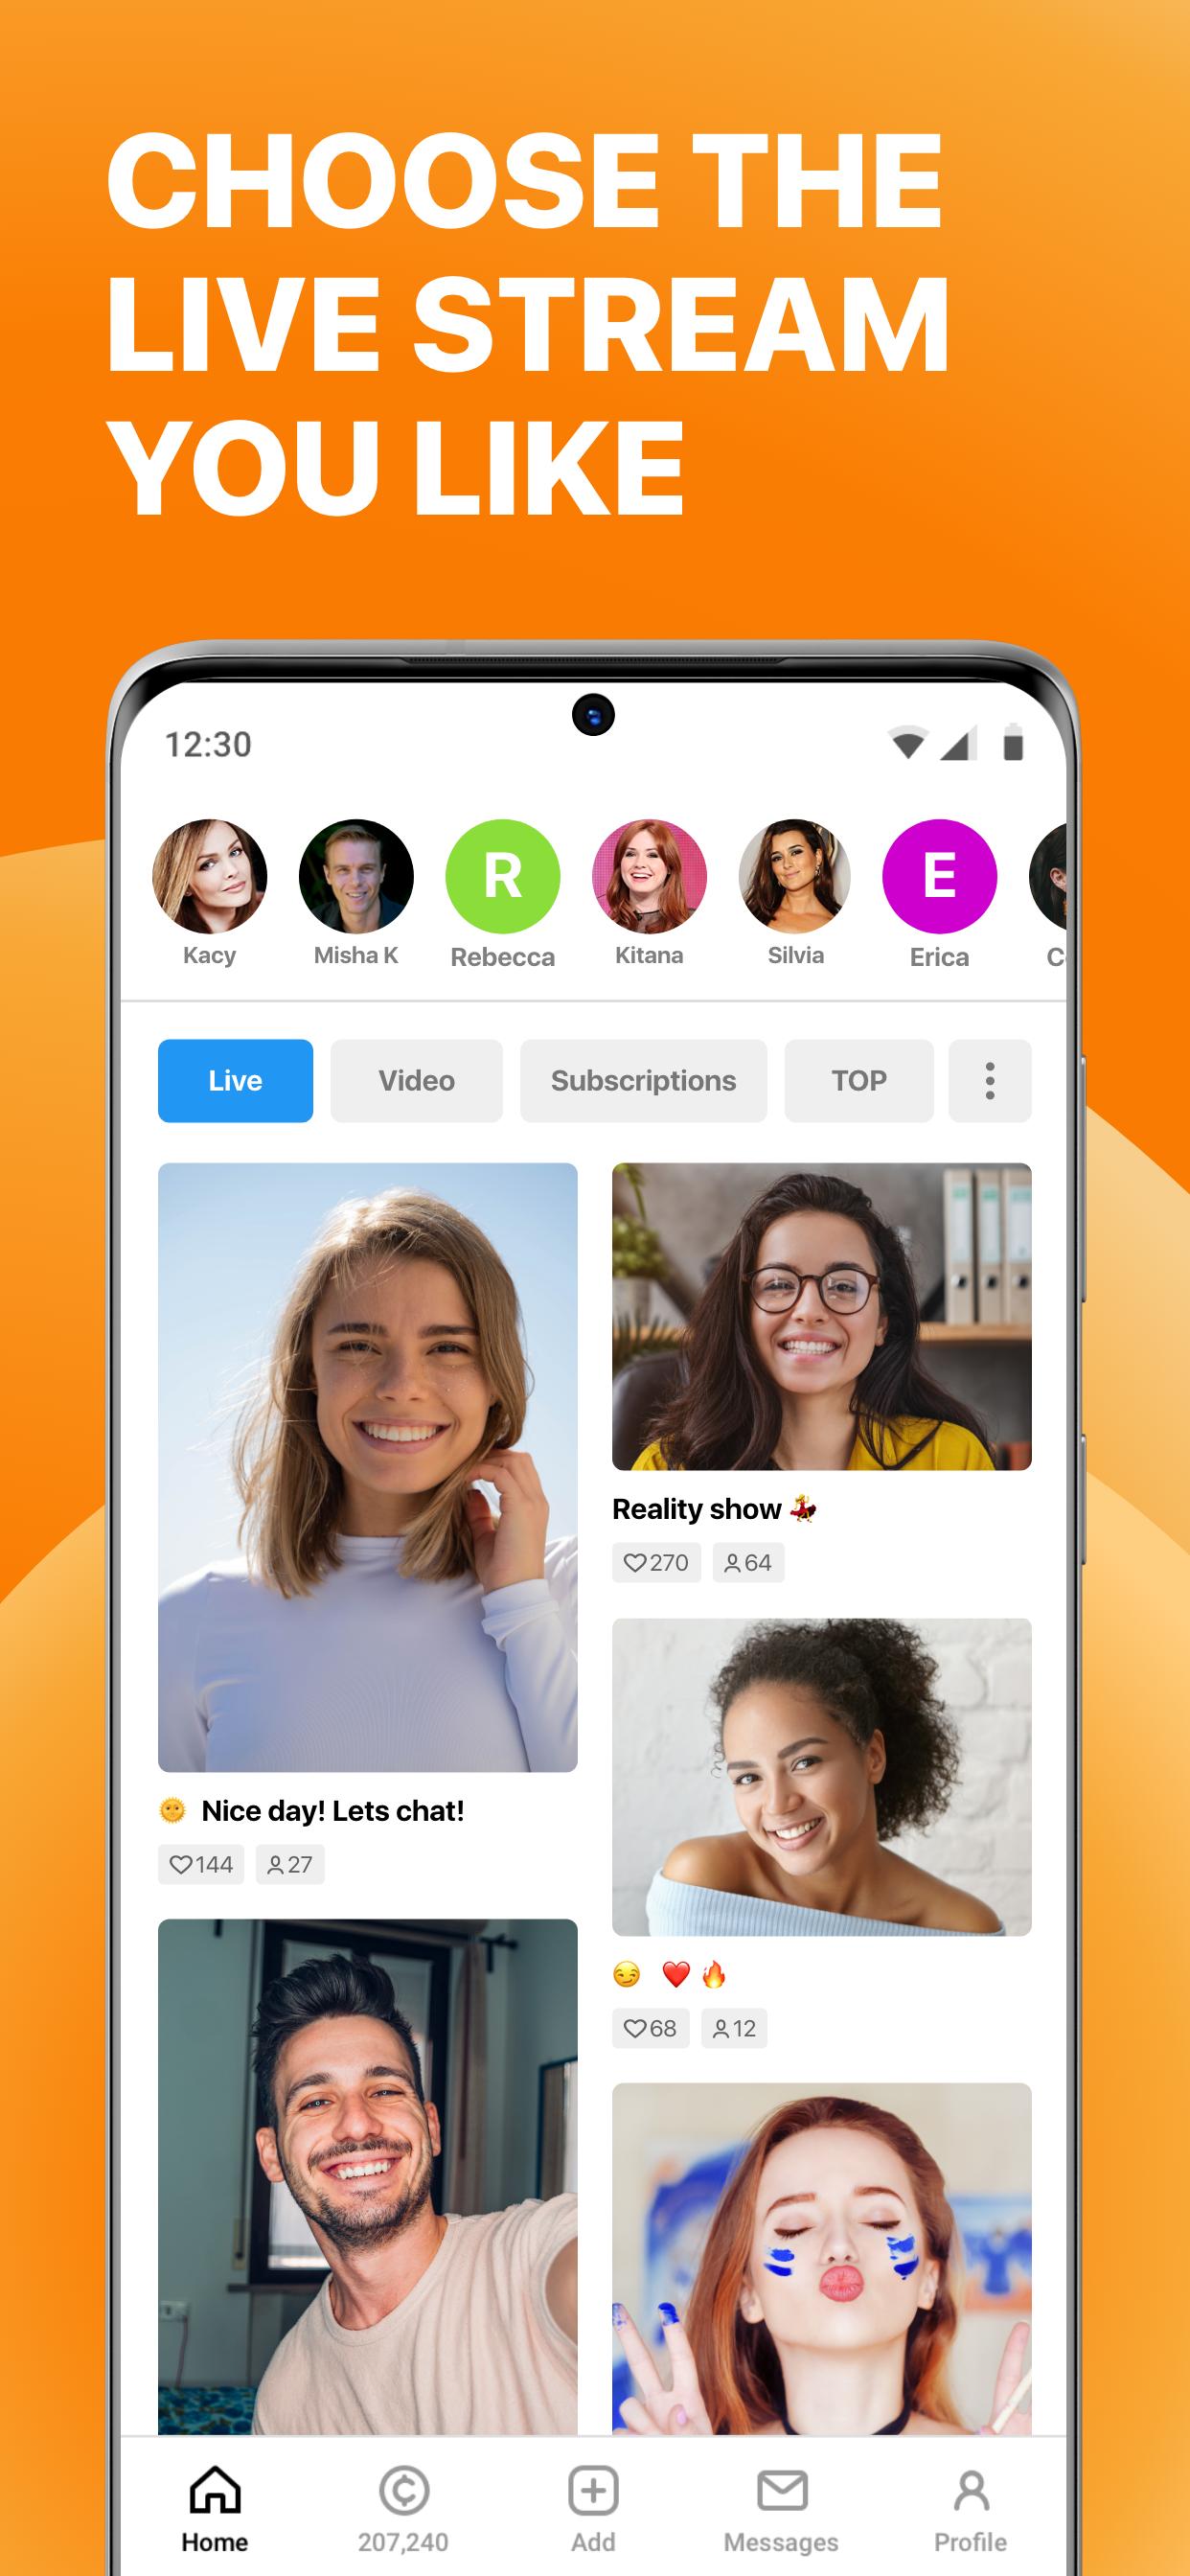 ChatRoulette - Free Video Chat に 類 似 Android ア プ リ.